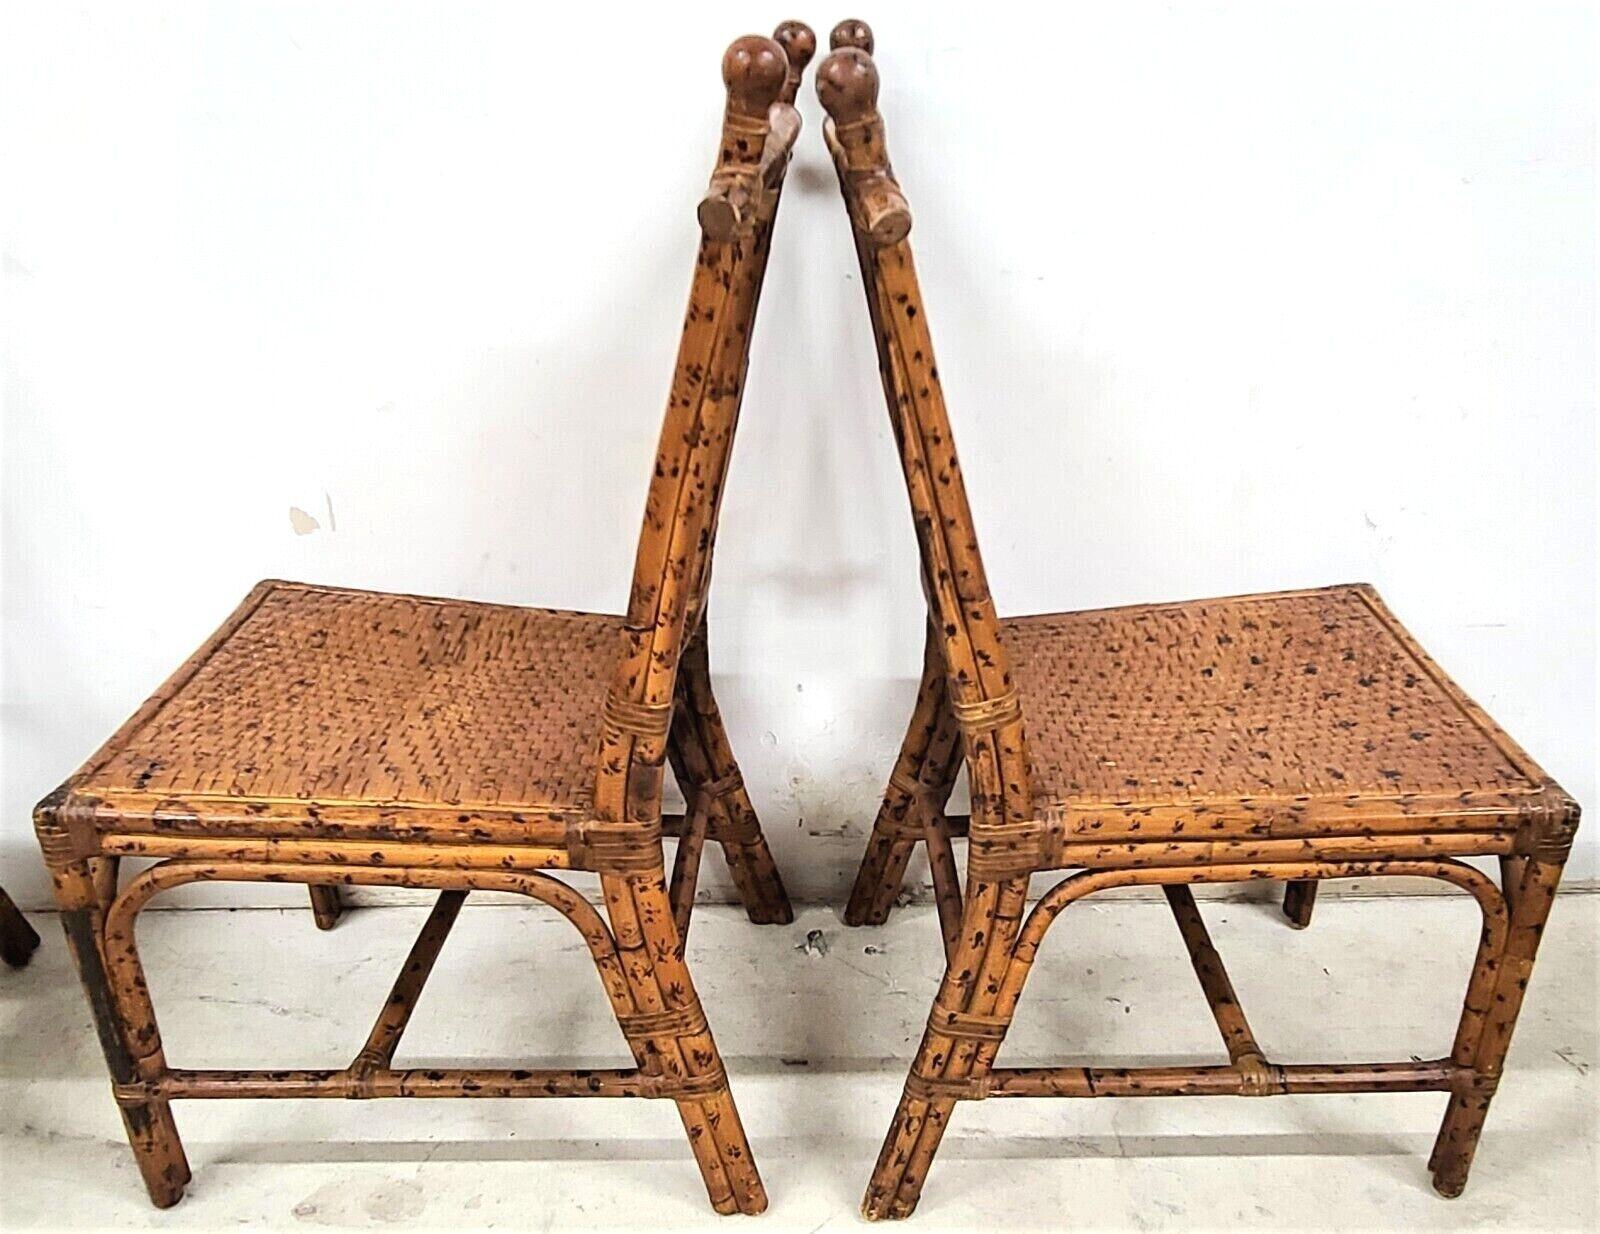 Offering One Of Our Recent Palm Beach Estate Fine Furniture Acquisitions Of A 
Set of 6 Vintage French Style Tortoise Bamboo Rattan Wicker Dining Chairs 

Approximate Measurements in Inches
38